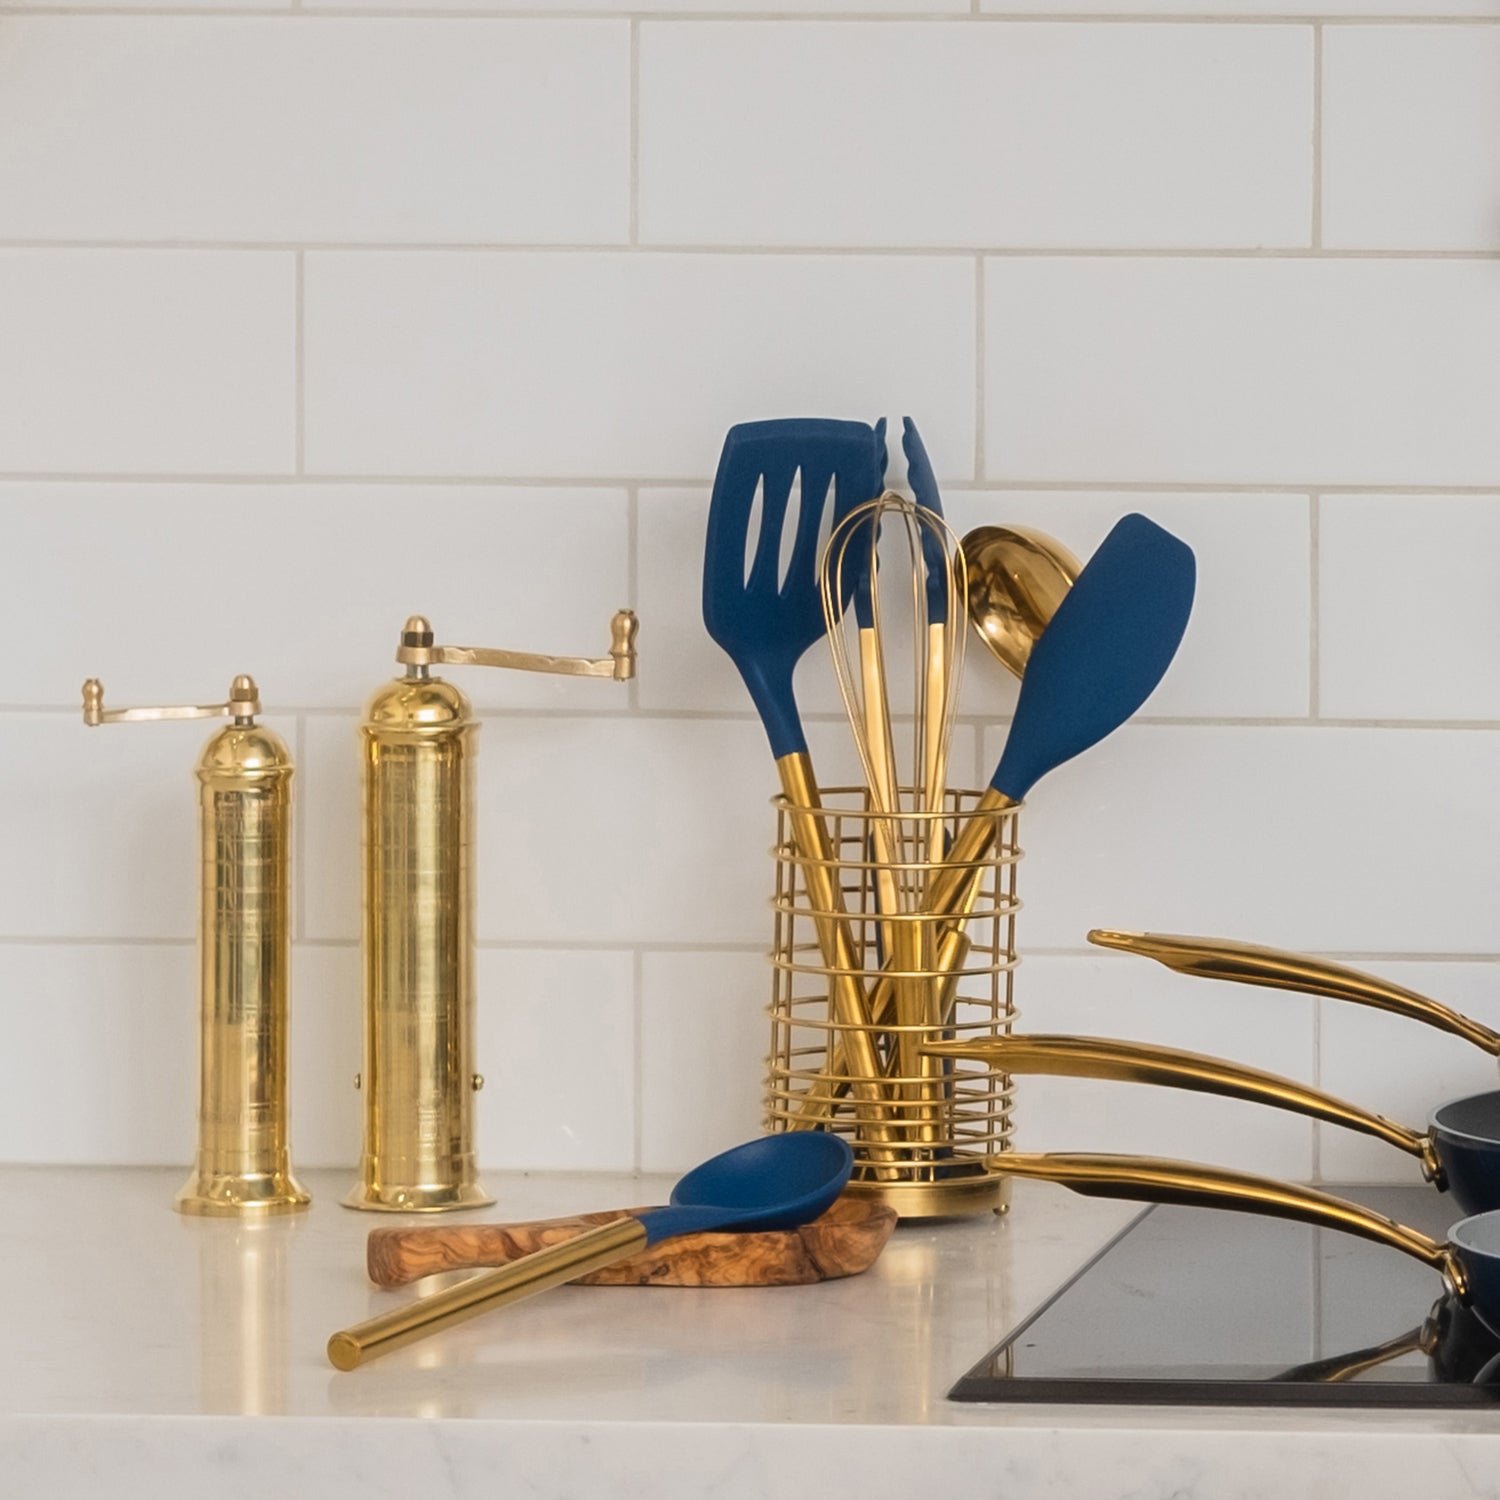 Navy and Gold Kitchen Utensils Set with Holder - Styled Settings